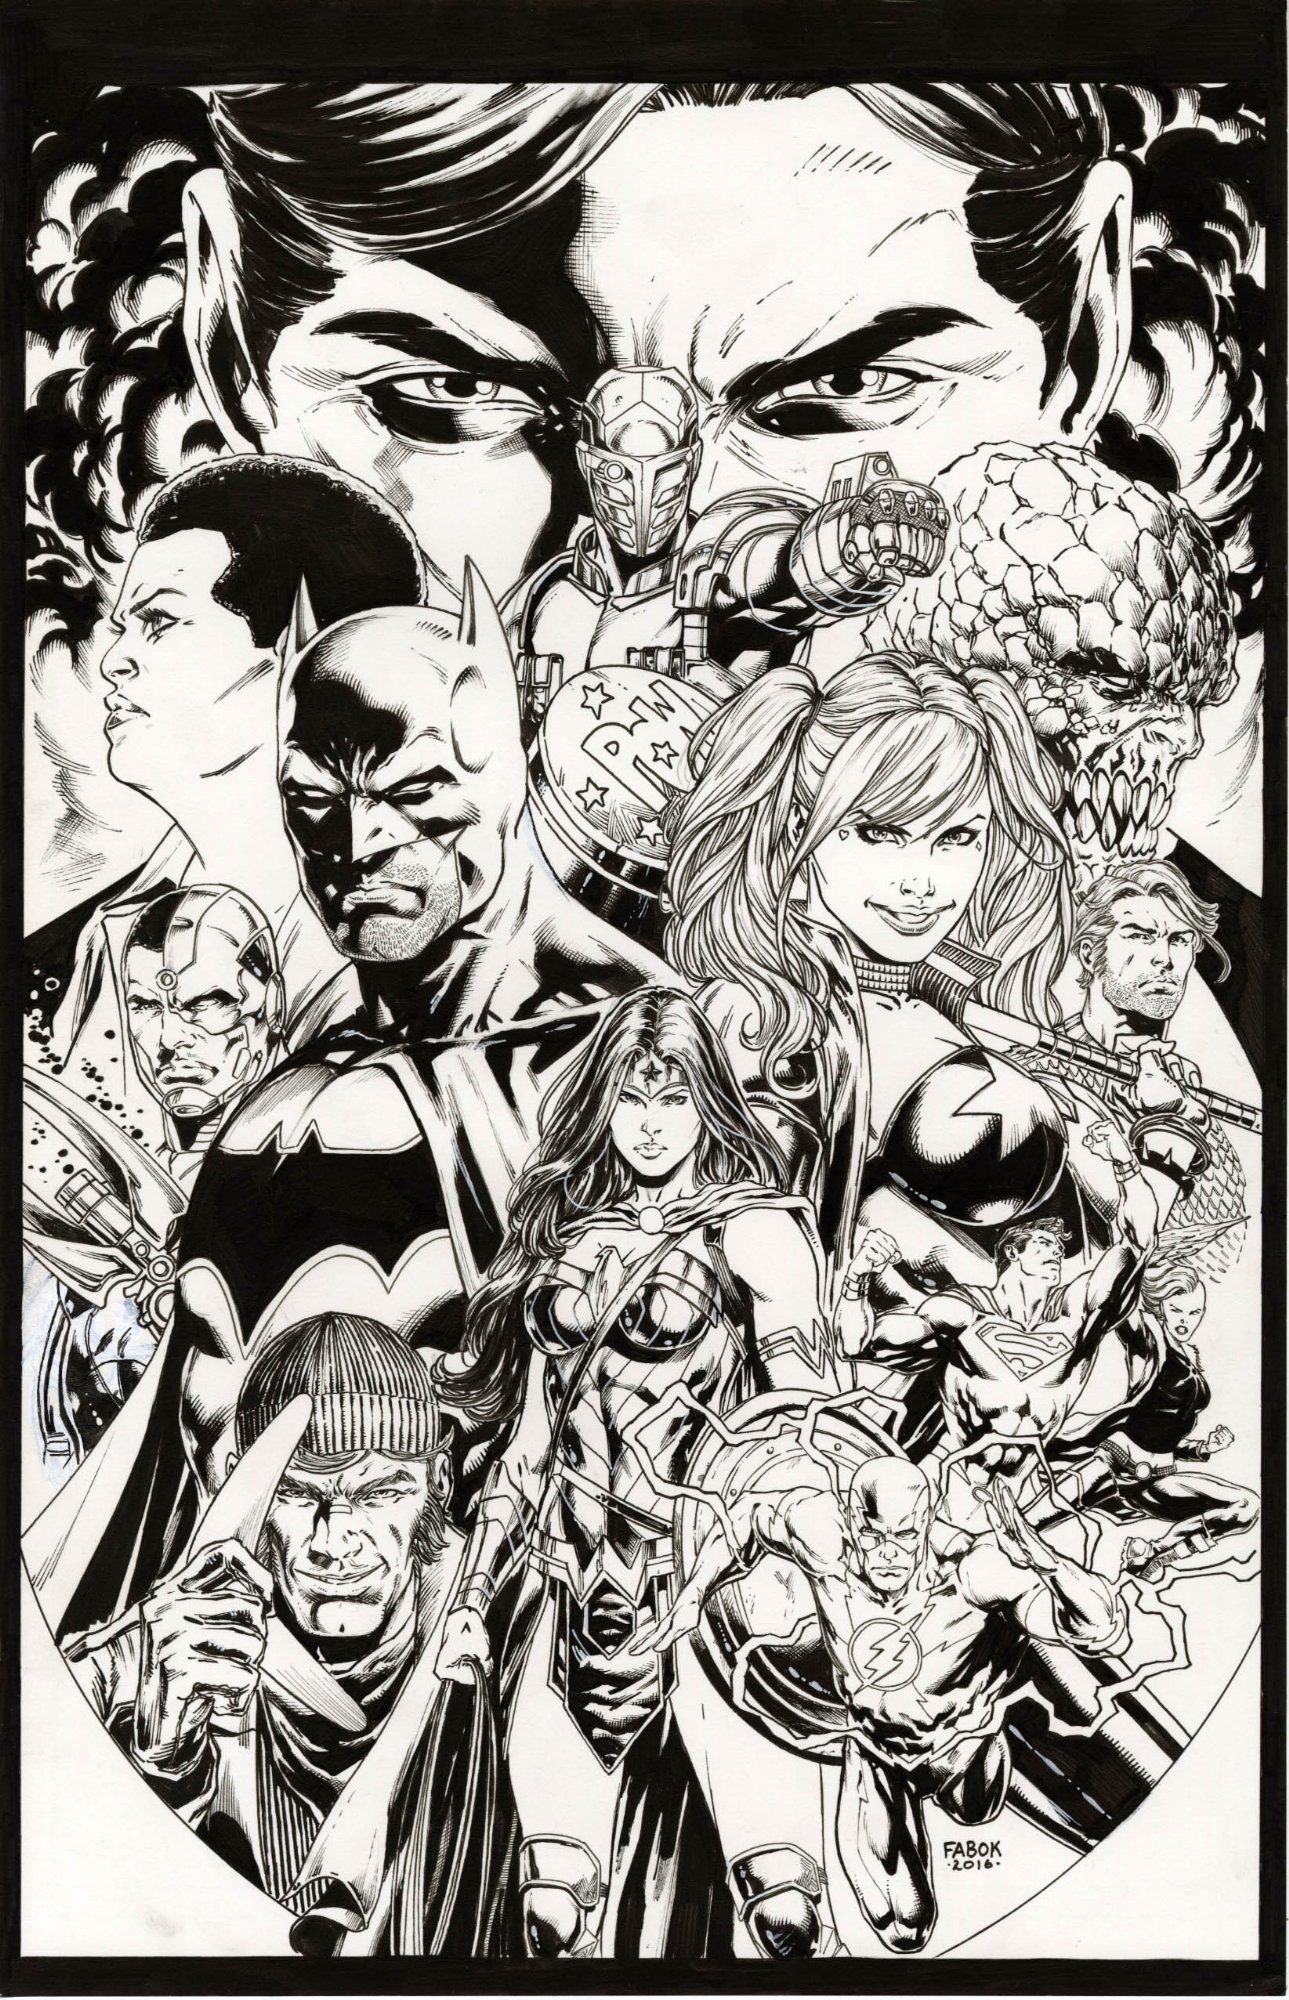 SUICIDE SQUAD KILL JUSTICE LEAGUE COVER by Jester-Bloodraven on DeviantArt